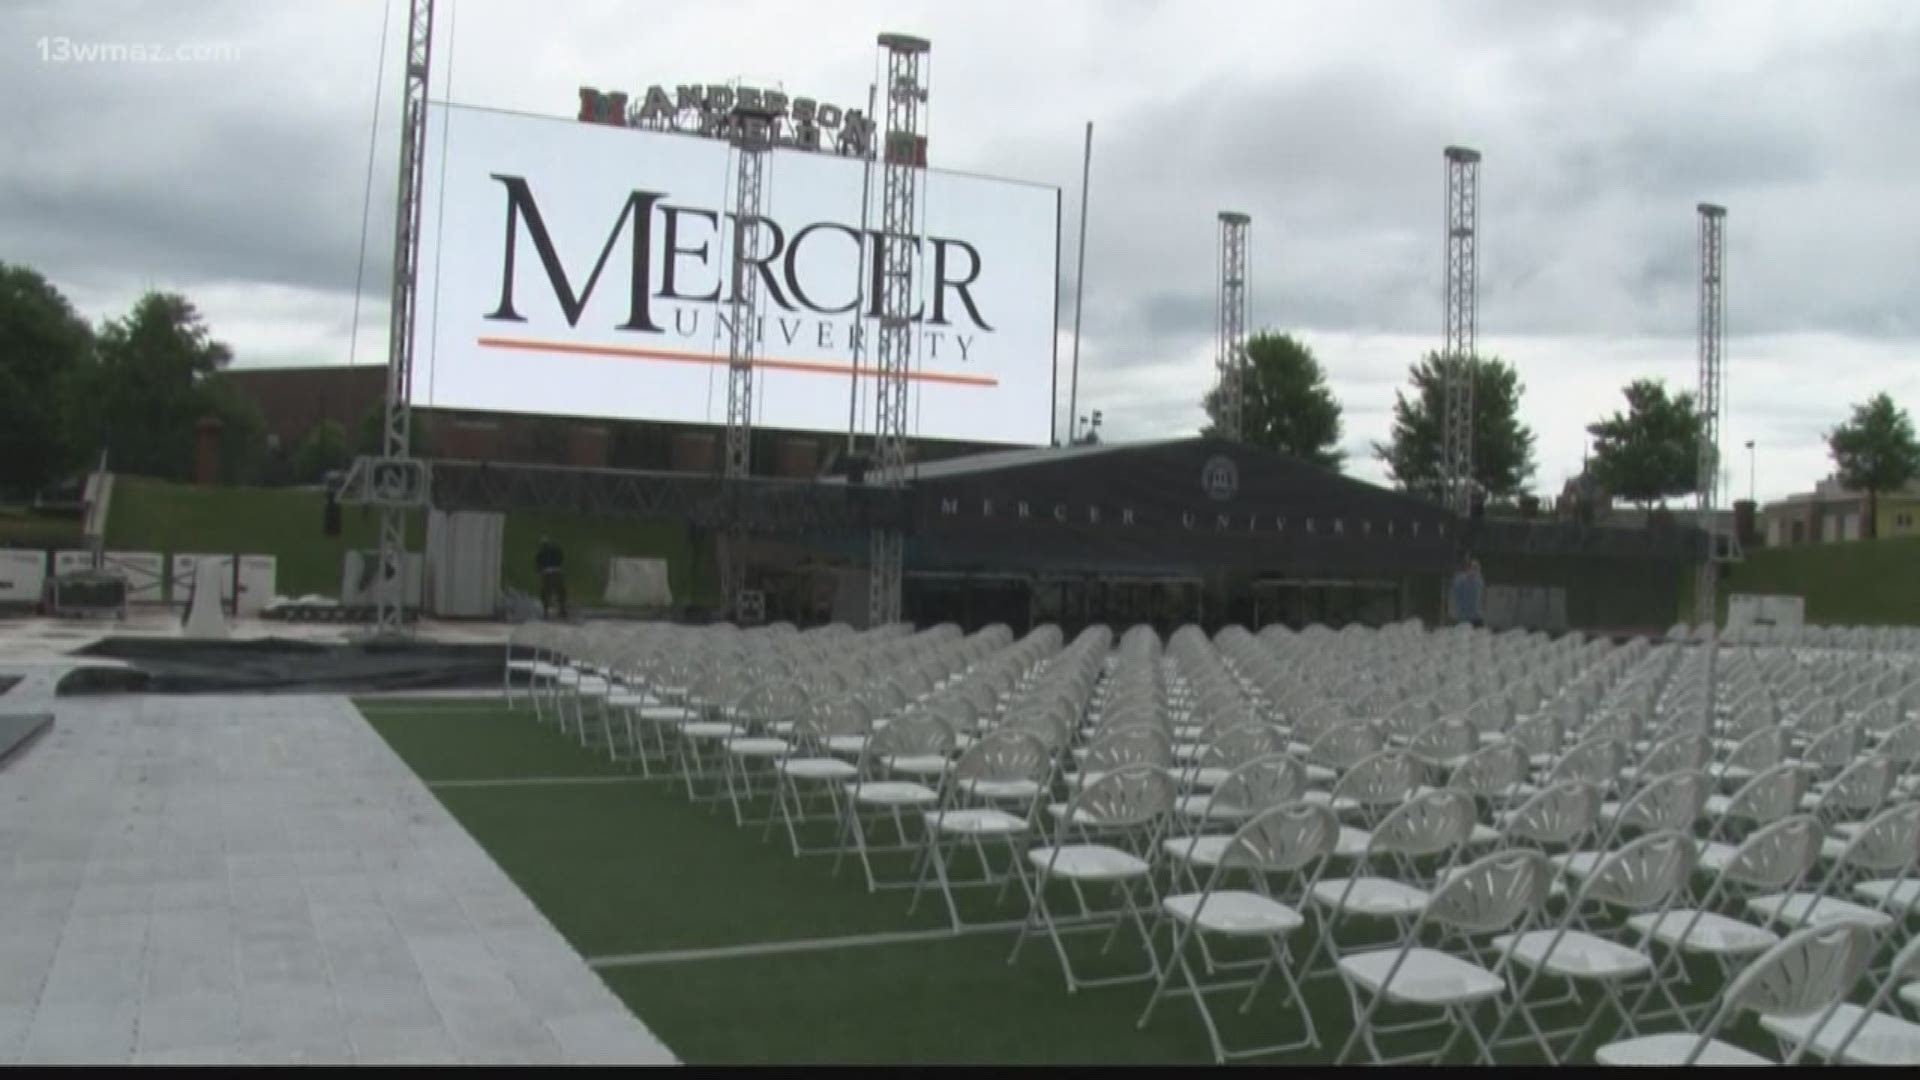 It's the first year Mercer University is holding its graduation in Five Star Stadium instead of in Hawkins Arena. This means more space for graduates' guests.